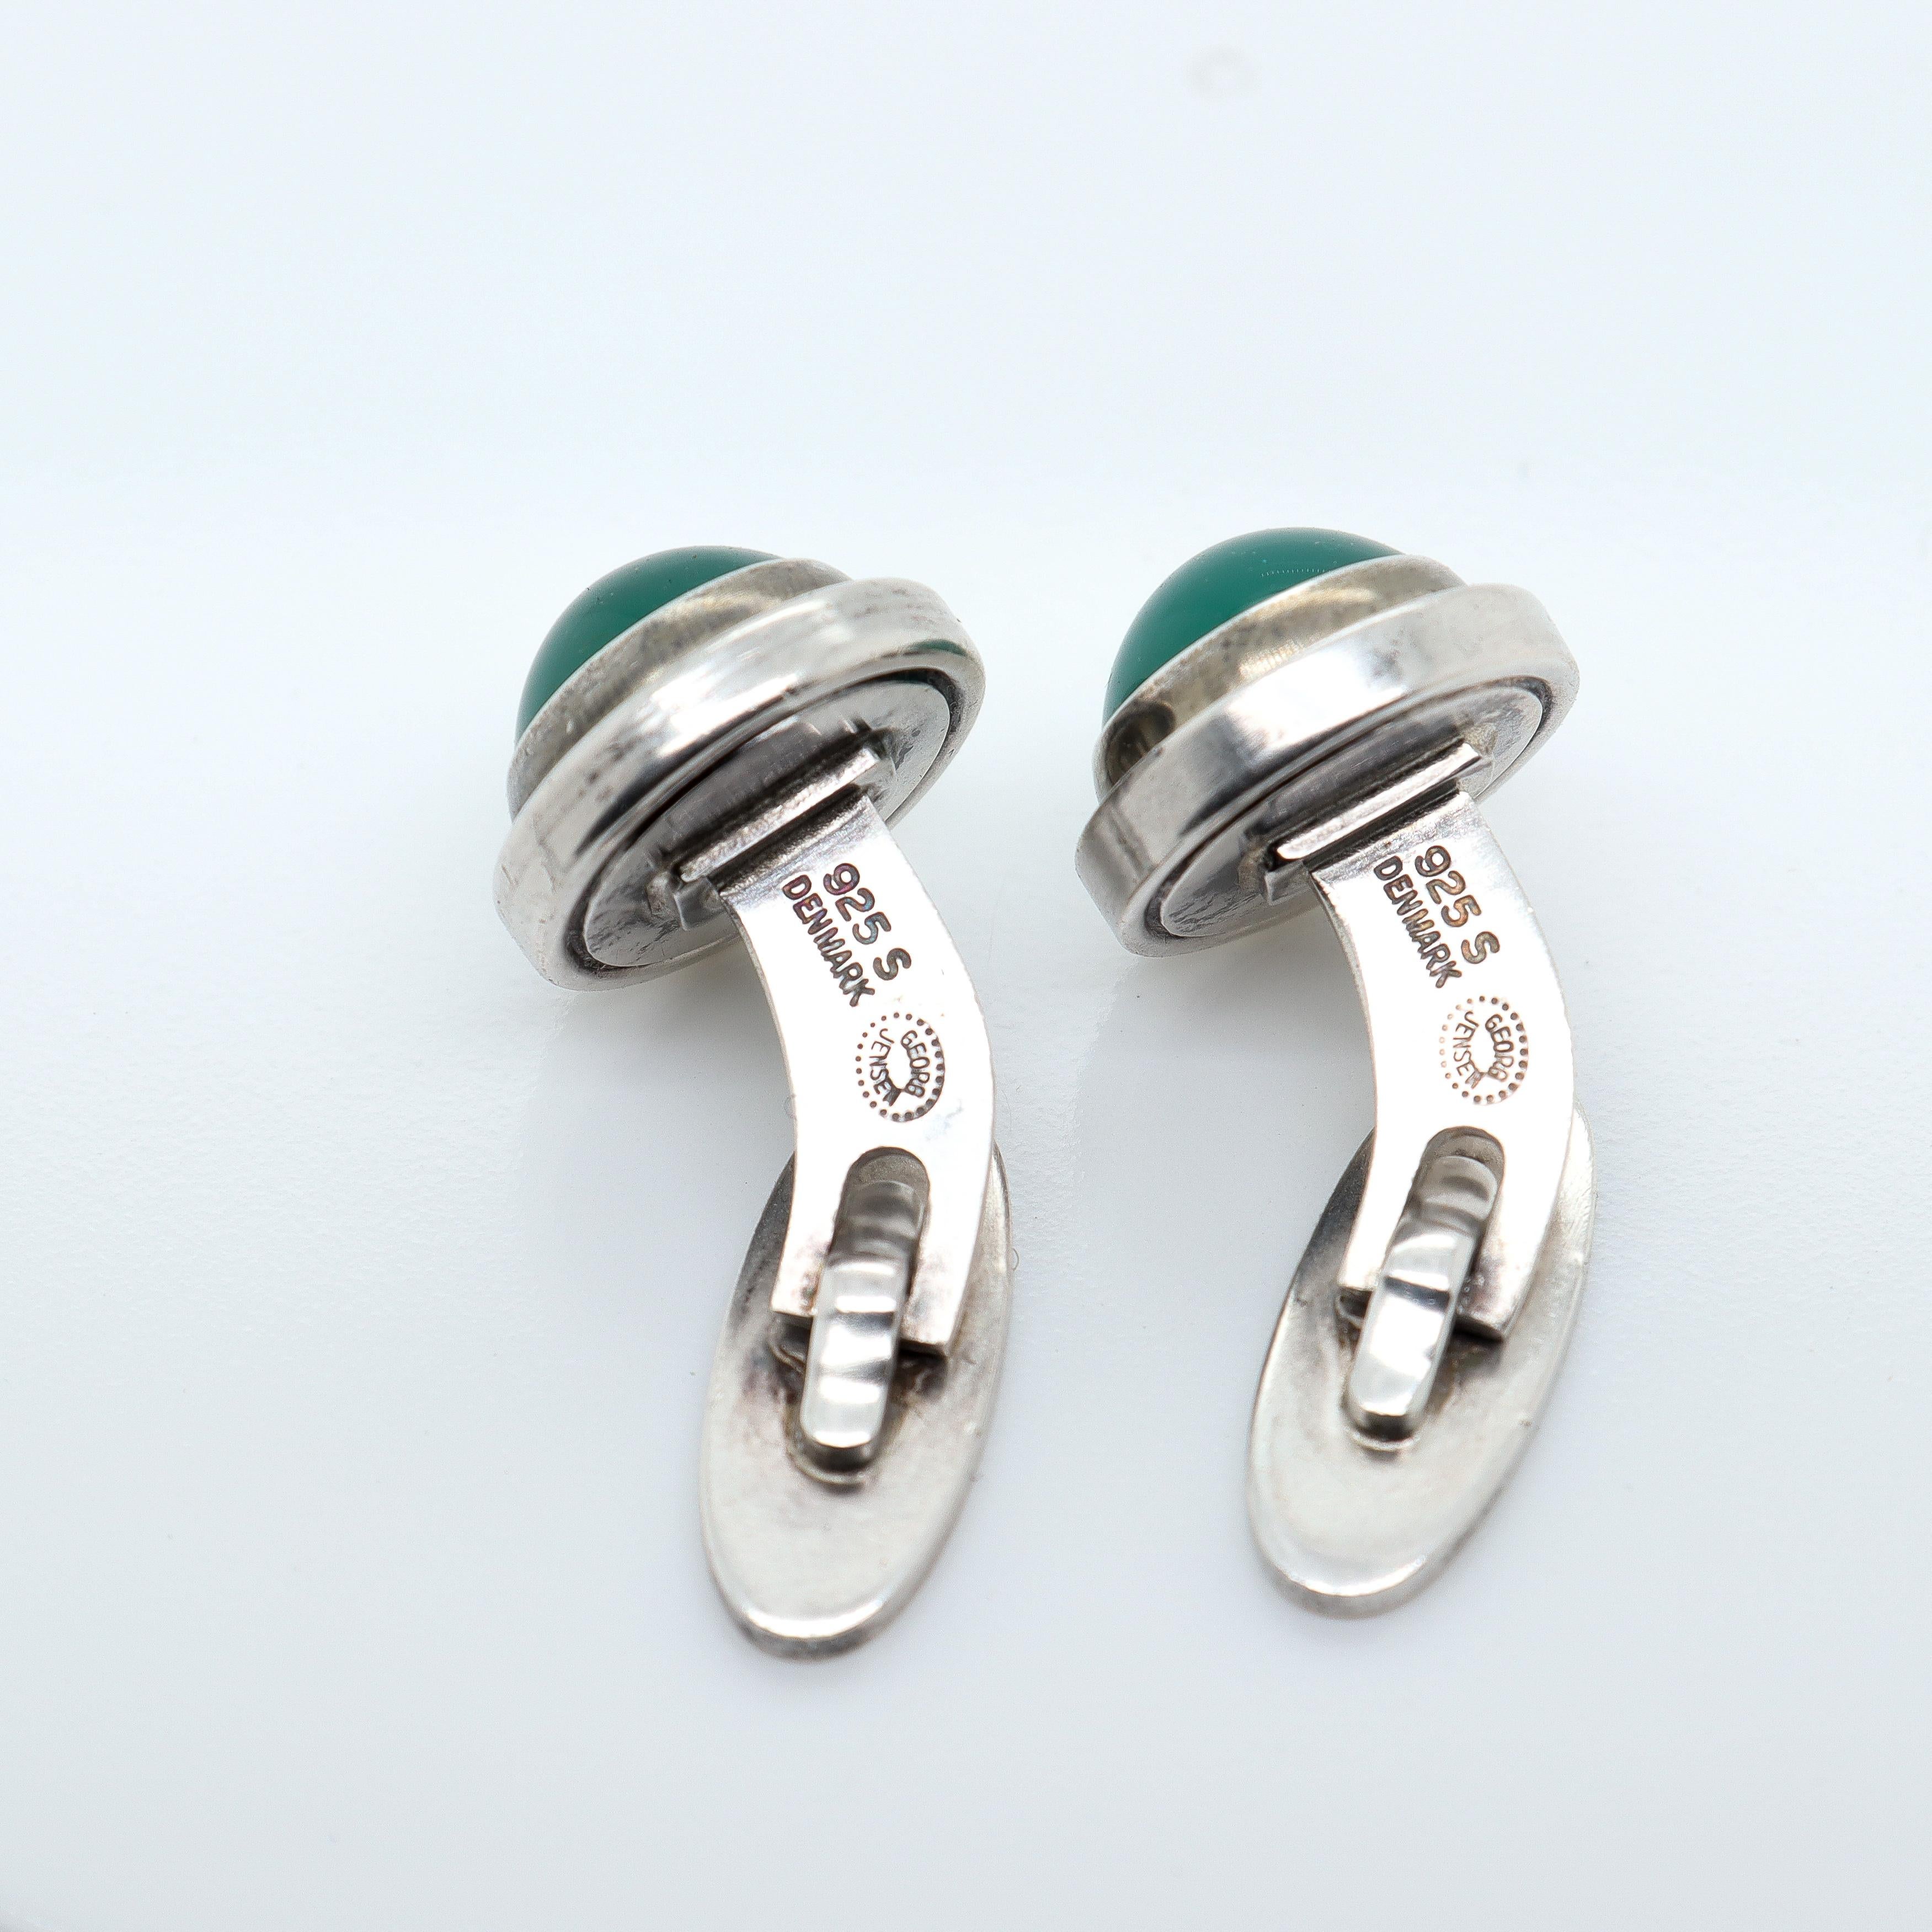 Georg Jensen Sterling Silver Cufflinks Model #44D with Chrysoprase Cabochons For Sale 1